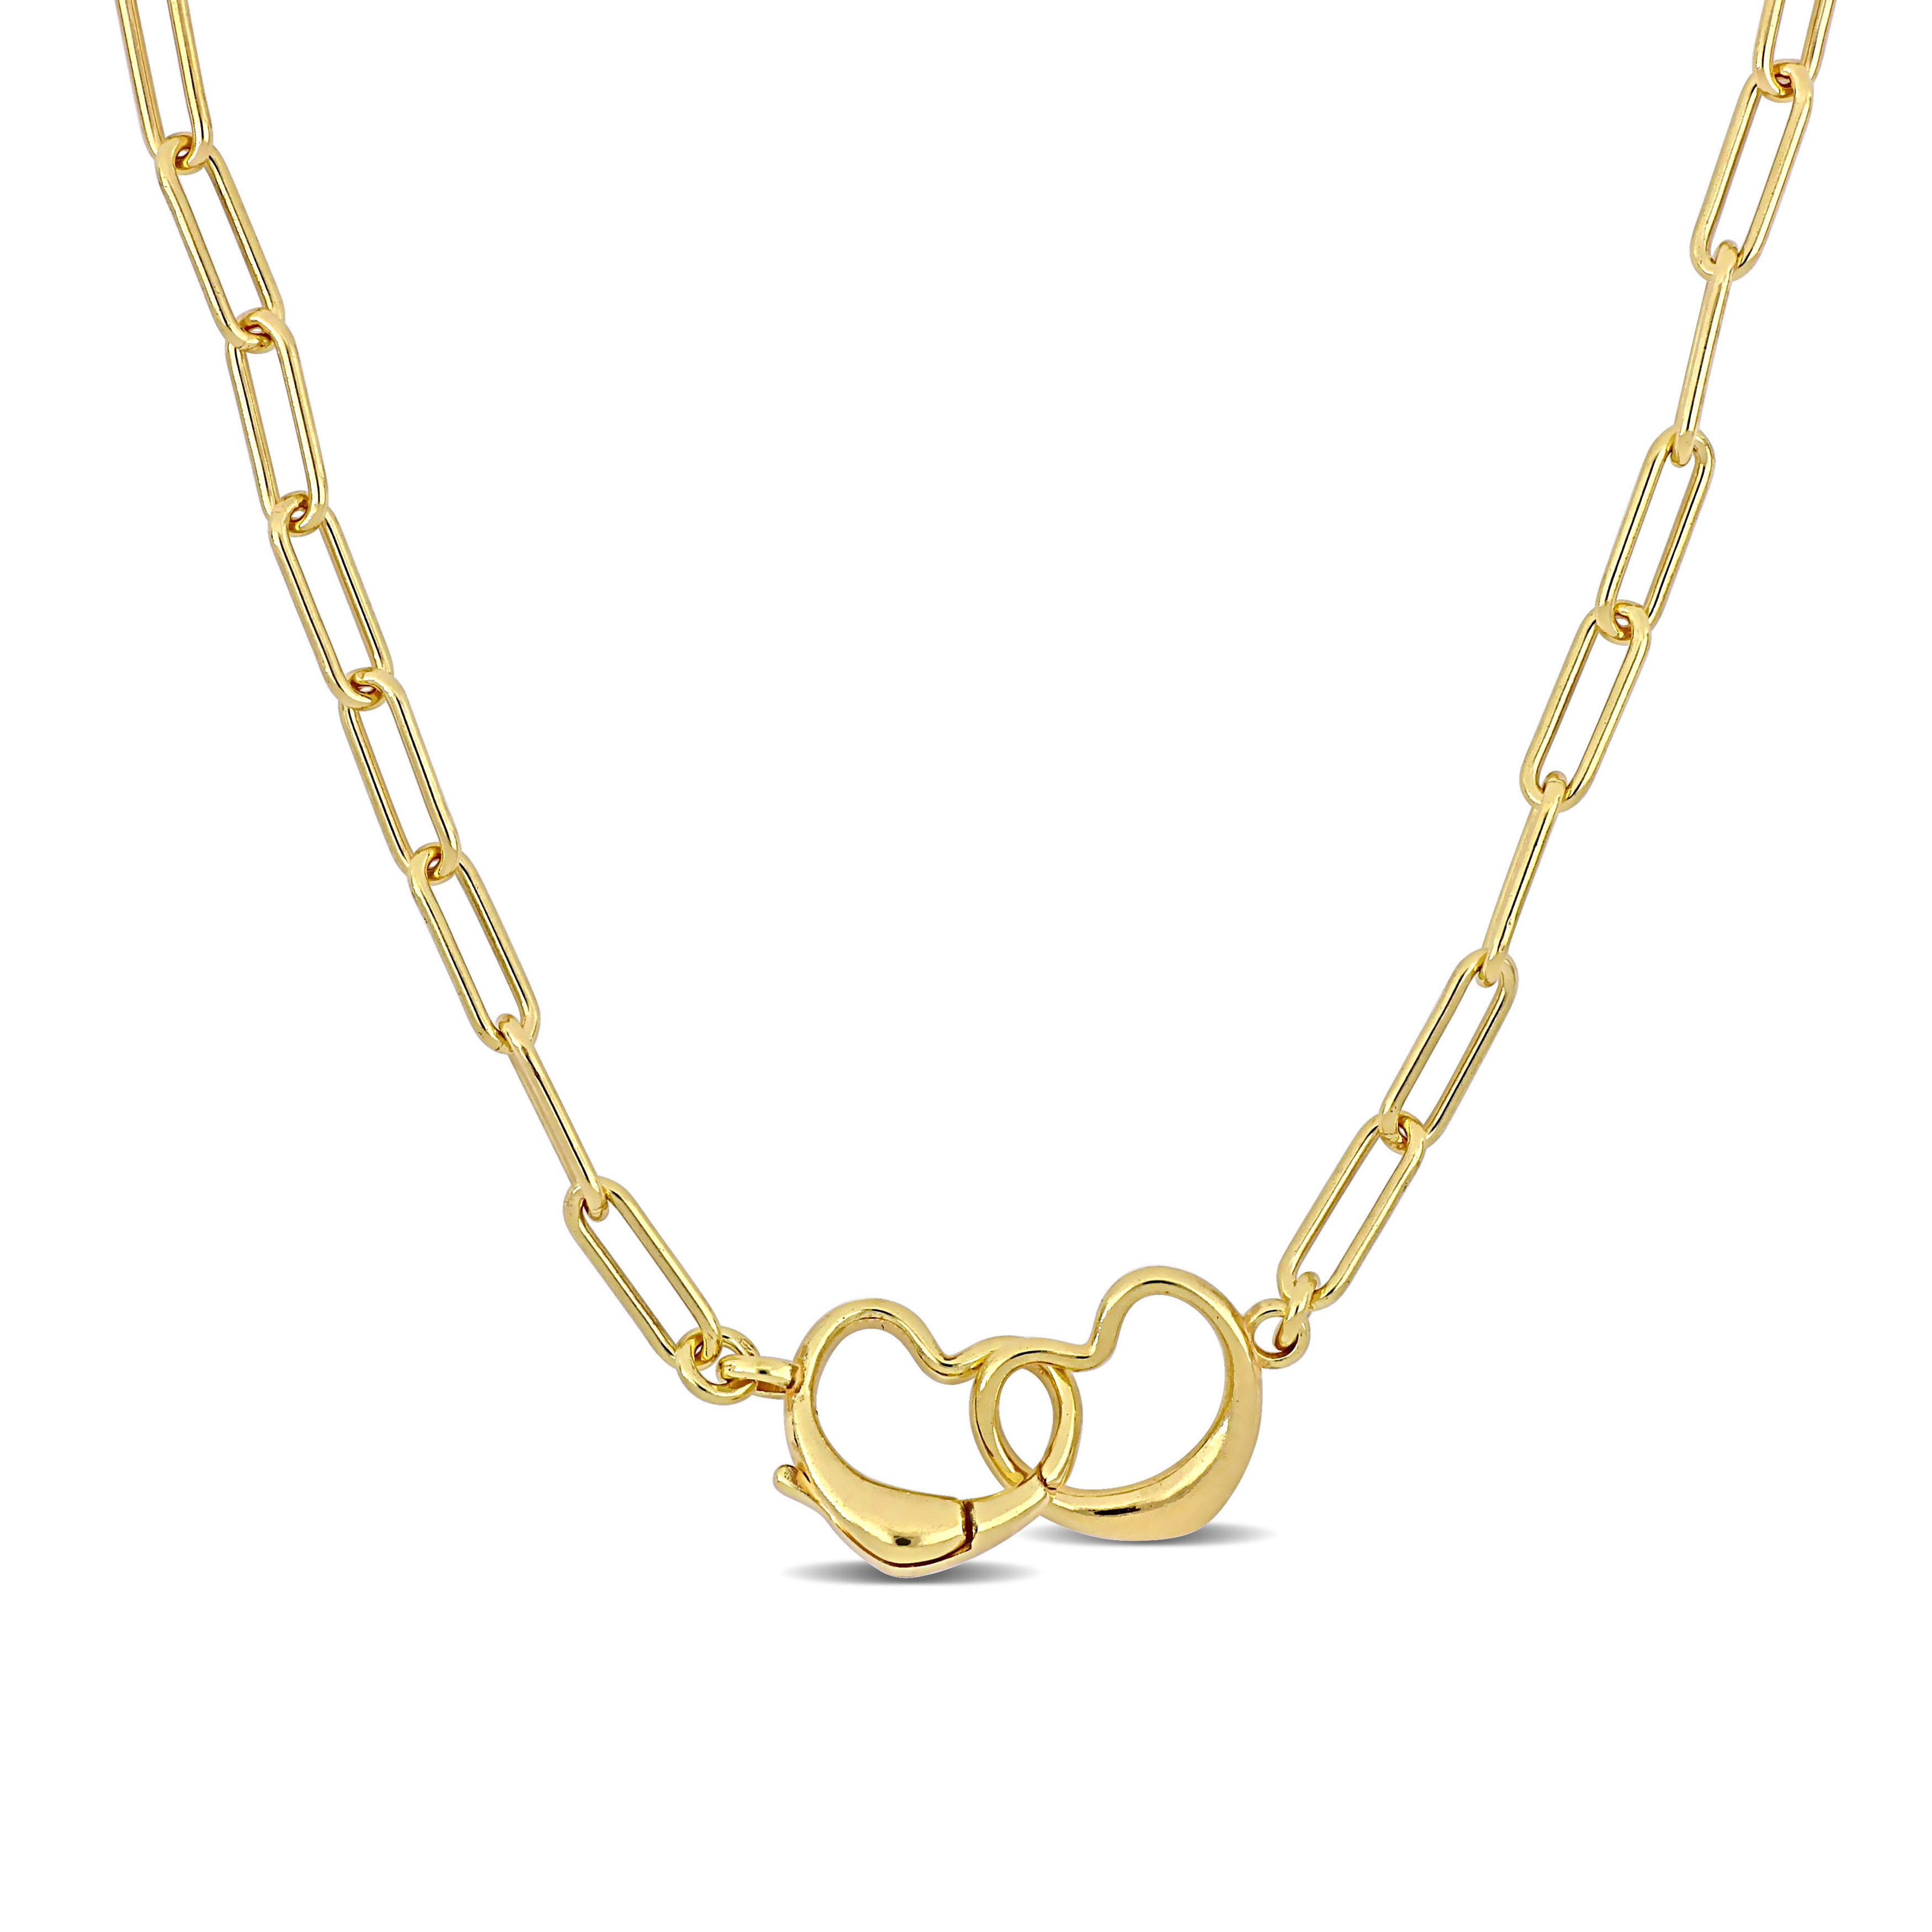 Paper Clip Link Necklace w/ Double Heart Charm Clasp in Yellow Plated Sterling Silver- 16 in.